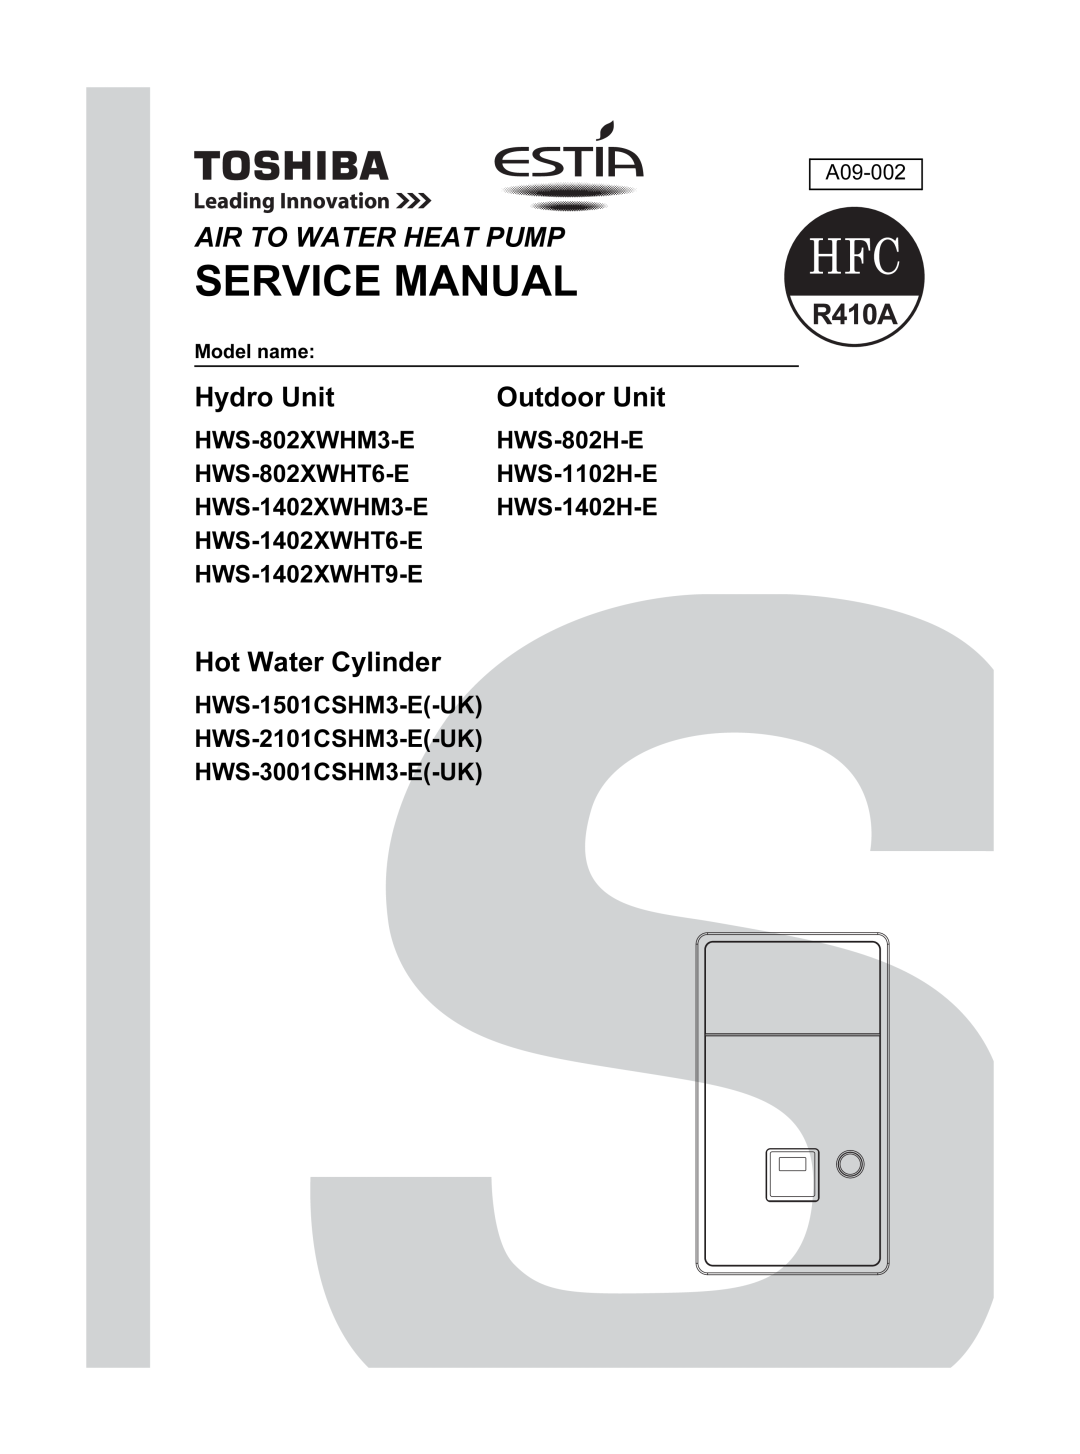 Toshiba HWS-802H-E service manual Air To Water Heat Pump, Hydro Unit, Outdoor Unit, Hot Water Cylinder, Service Manual 